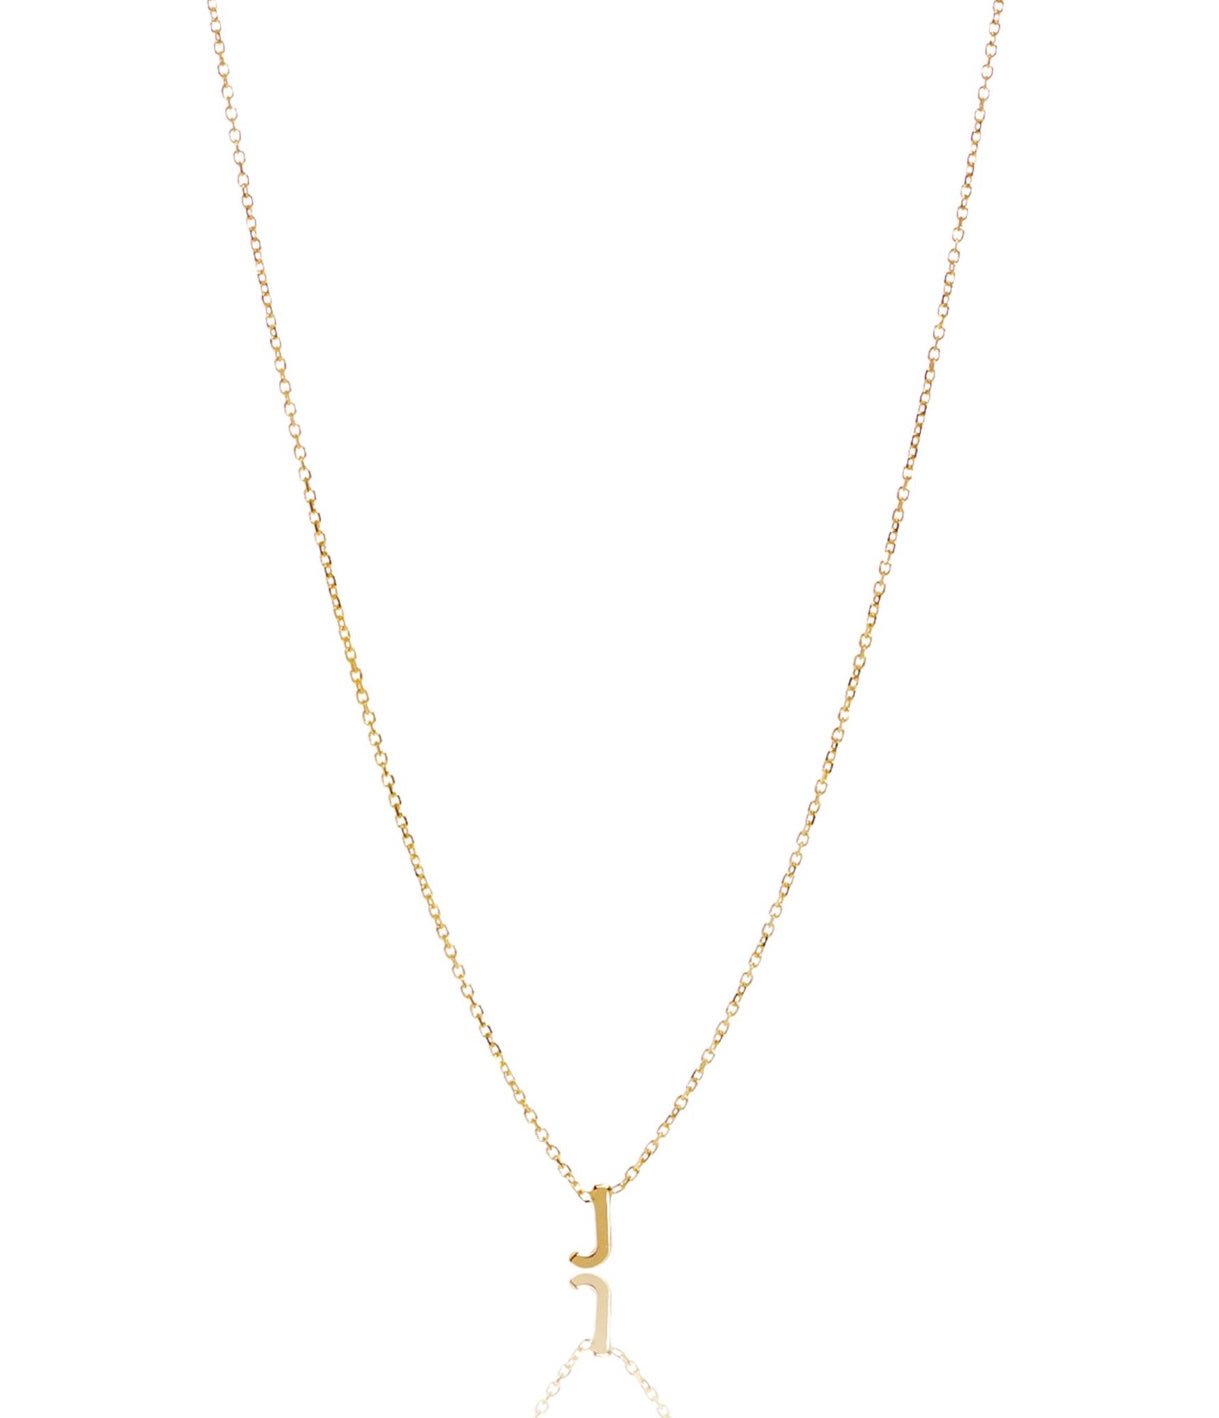 9 Carat Yellow Gold Initial Necklace Personalized Pendant | Dainty and Customizable | Adjustable Length: 38 cm-42 cm | Perfect Gift Idea - RubyJade